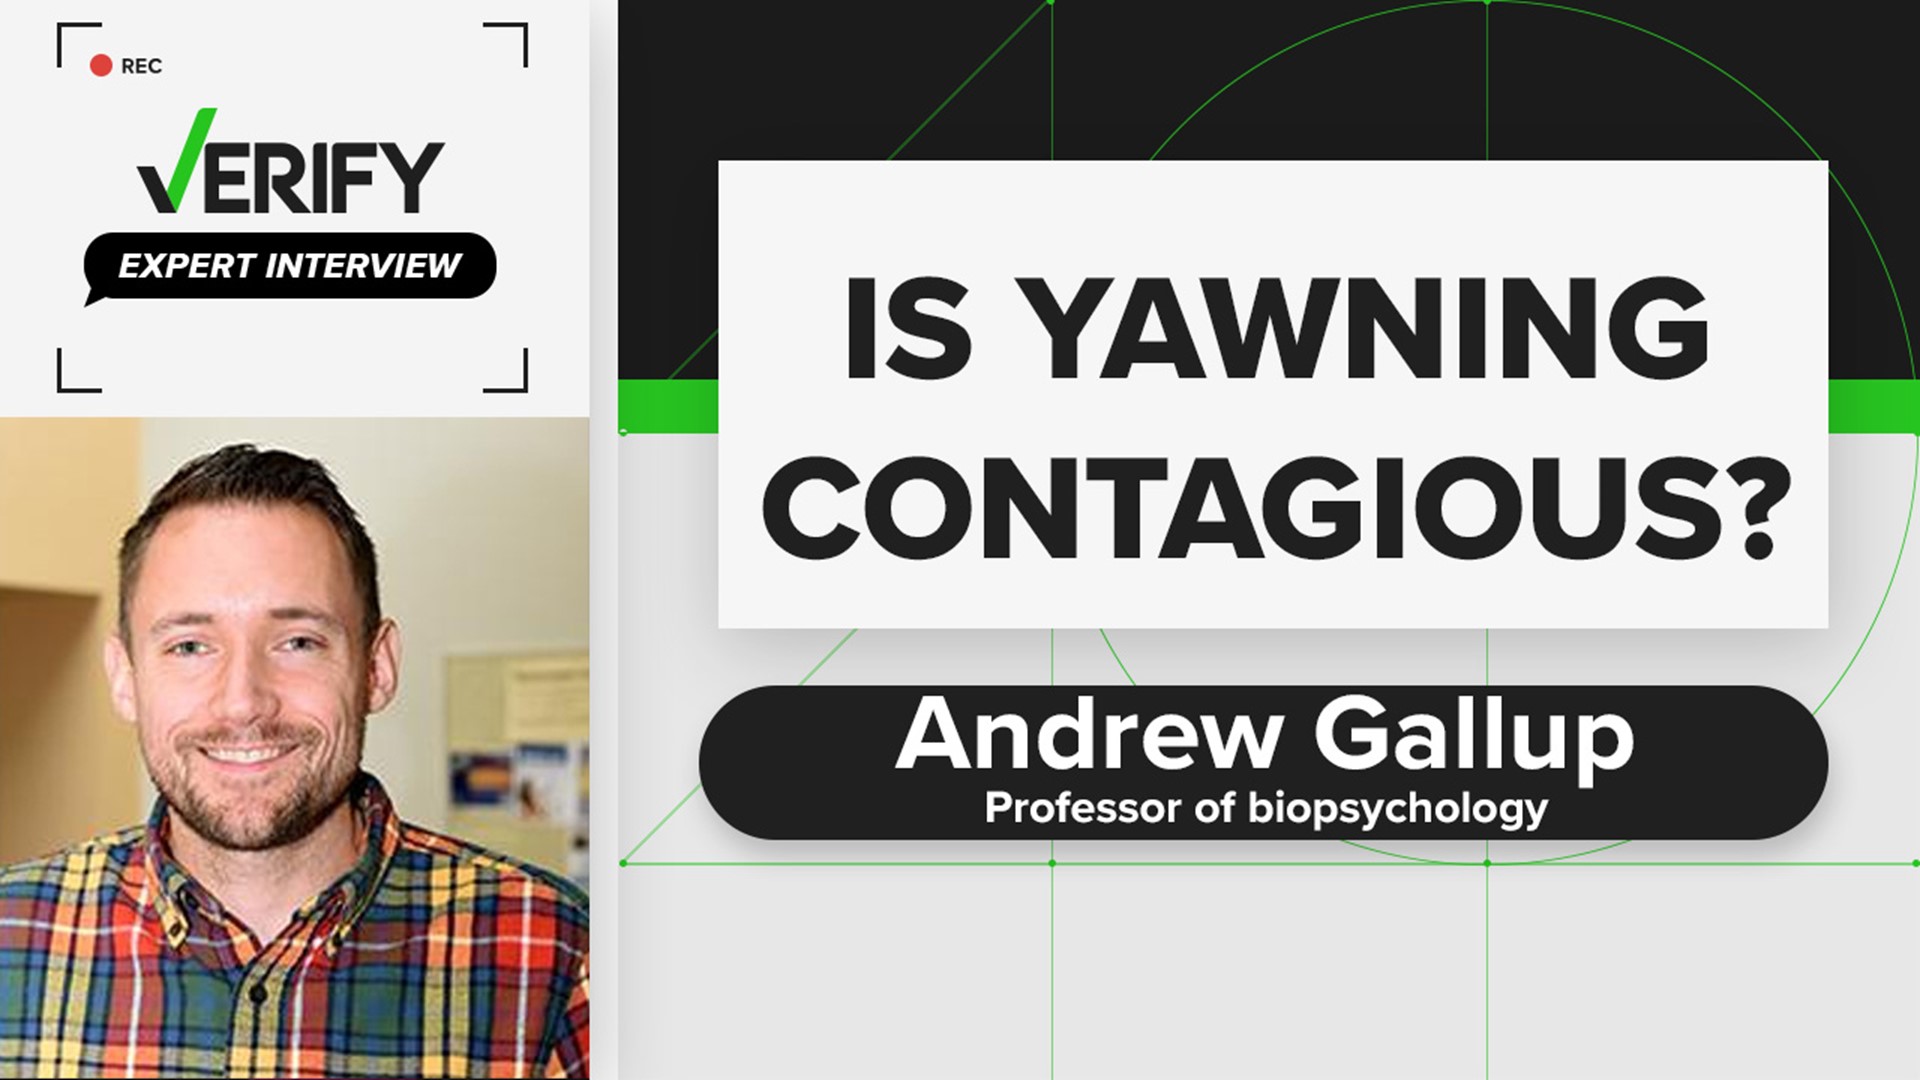 Andrew Gallup, a professor of biopsychology at SUNY Polytechnic Institute, talks with VERIFY about whether yawning is contagious.